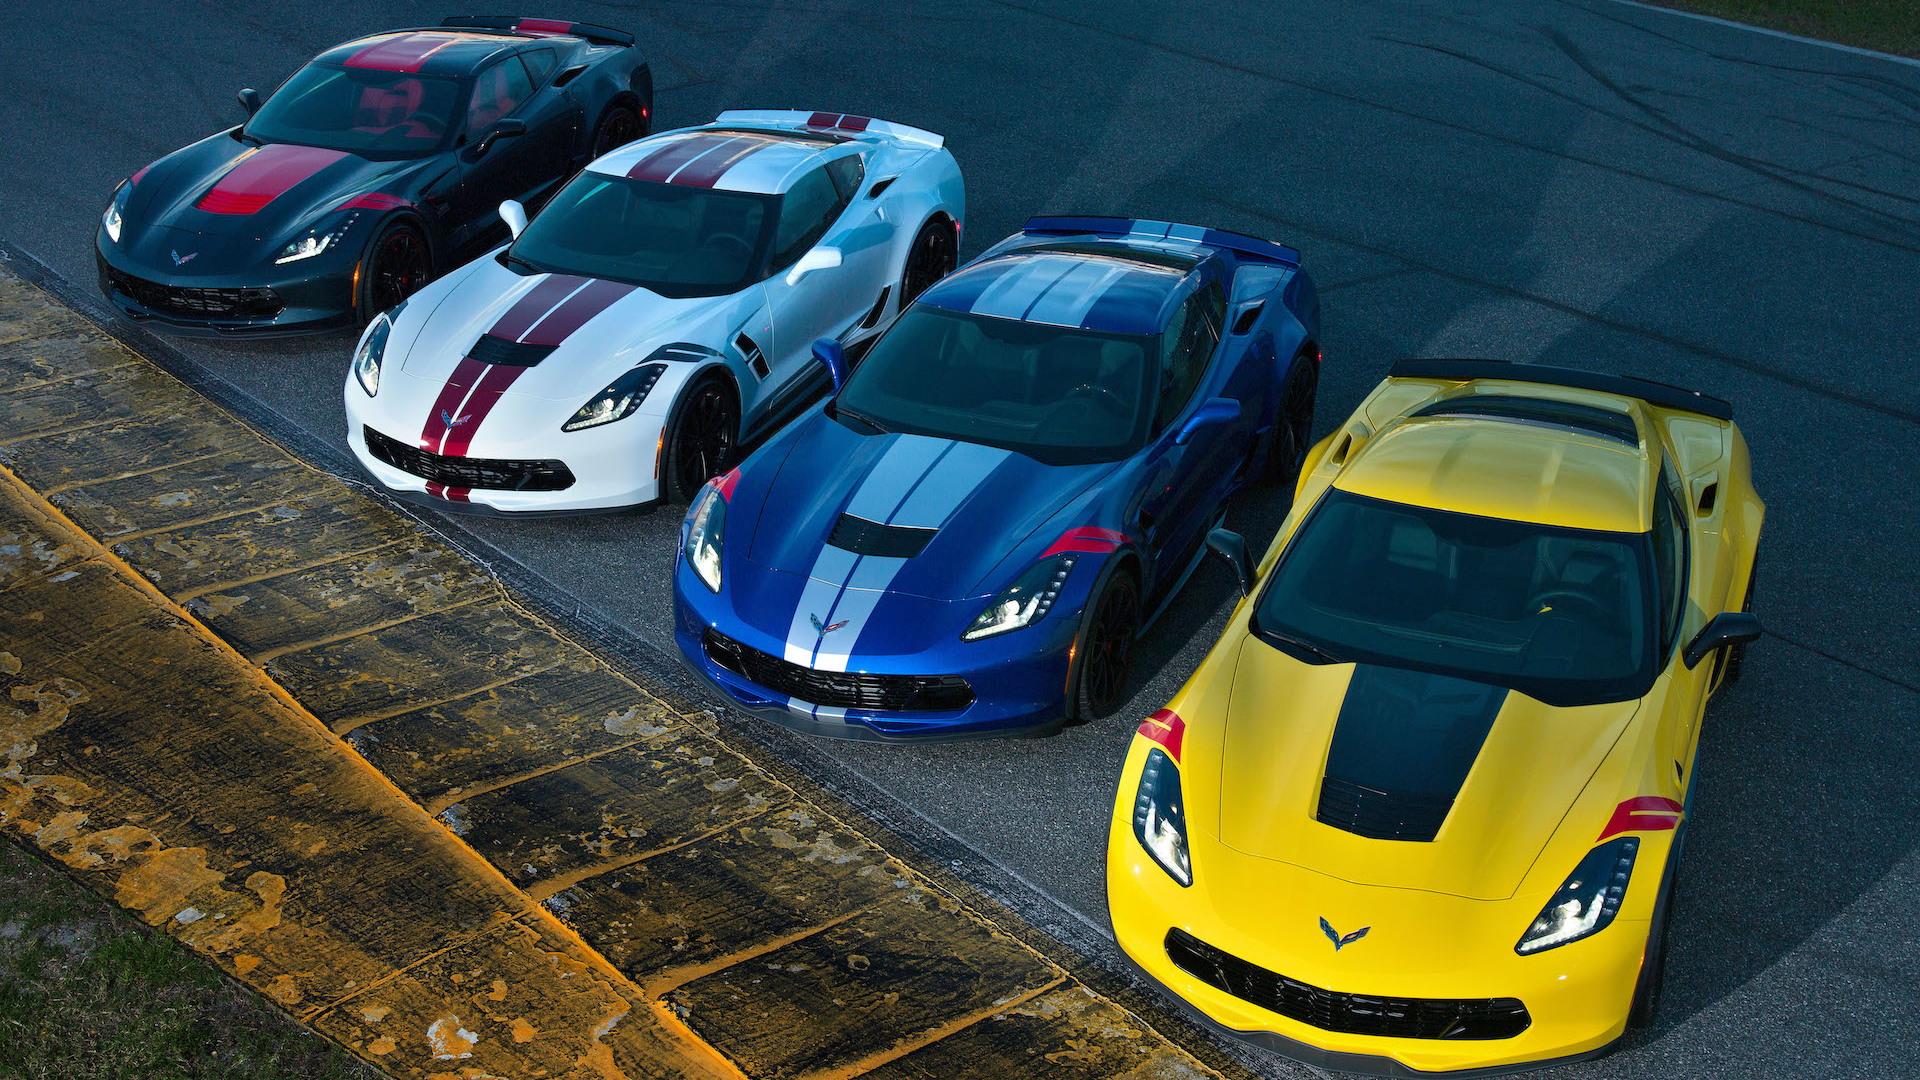 2019 Chevrolet Corvette Drivers Series special editions